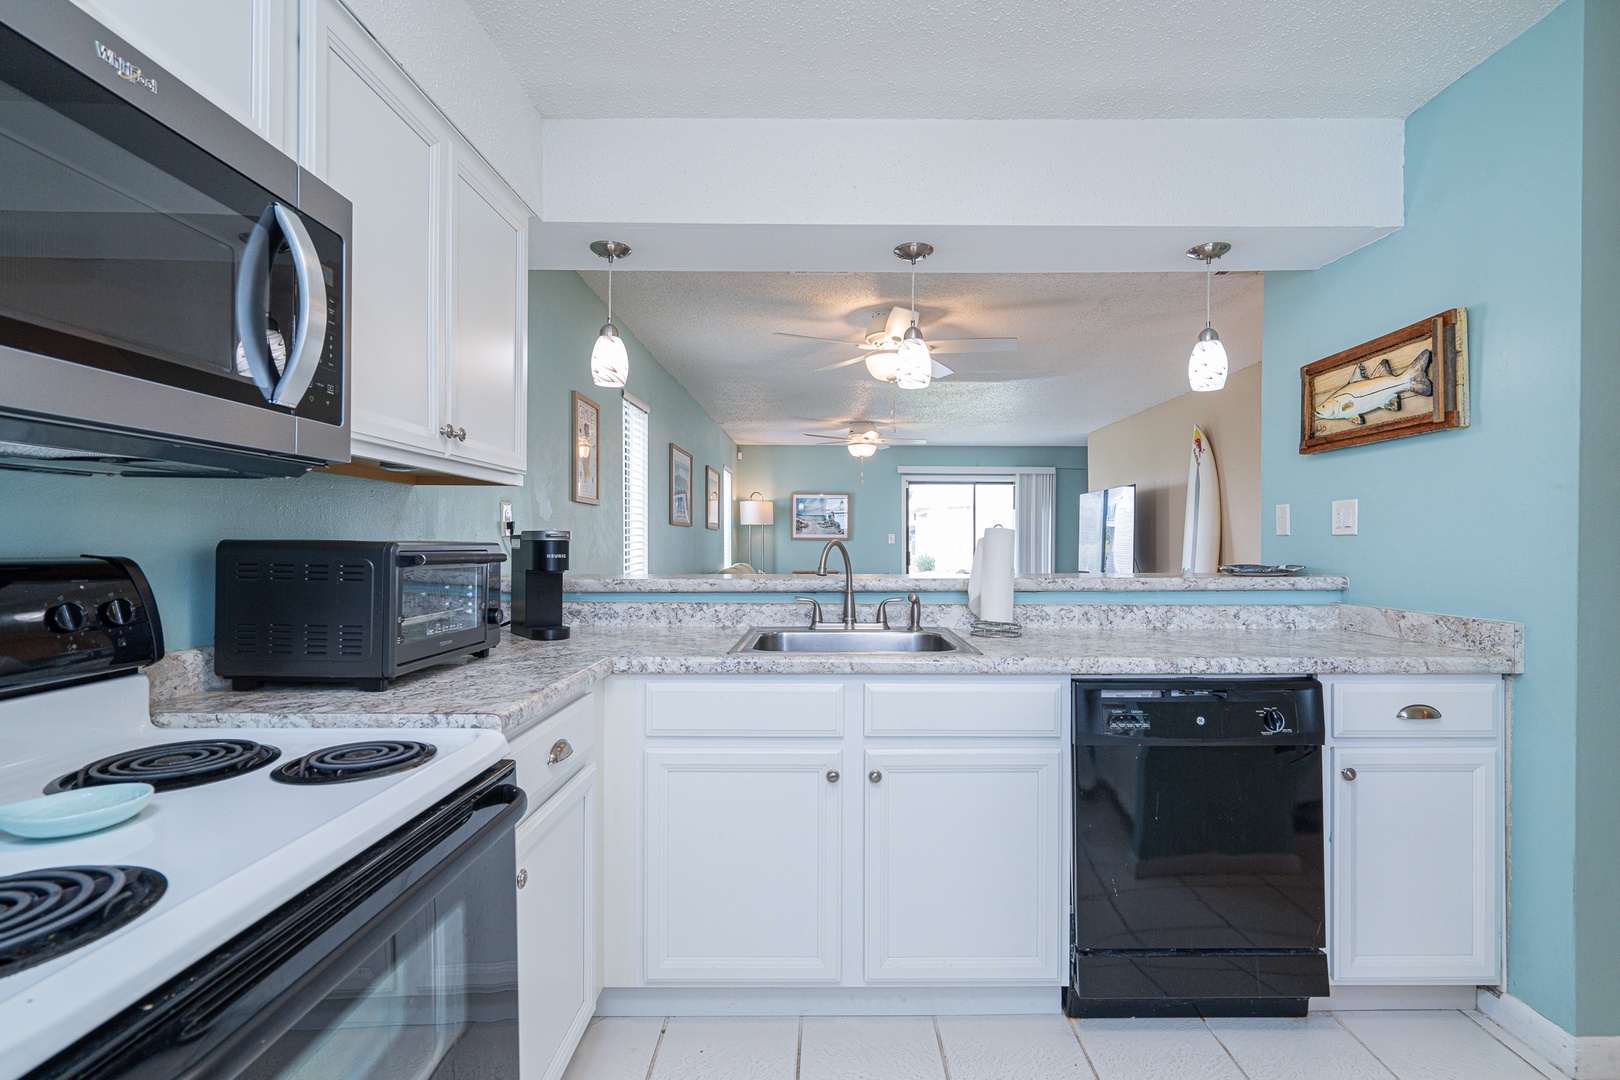 The open, breezy kitchen offers ample space & all the comforts of home